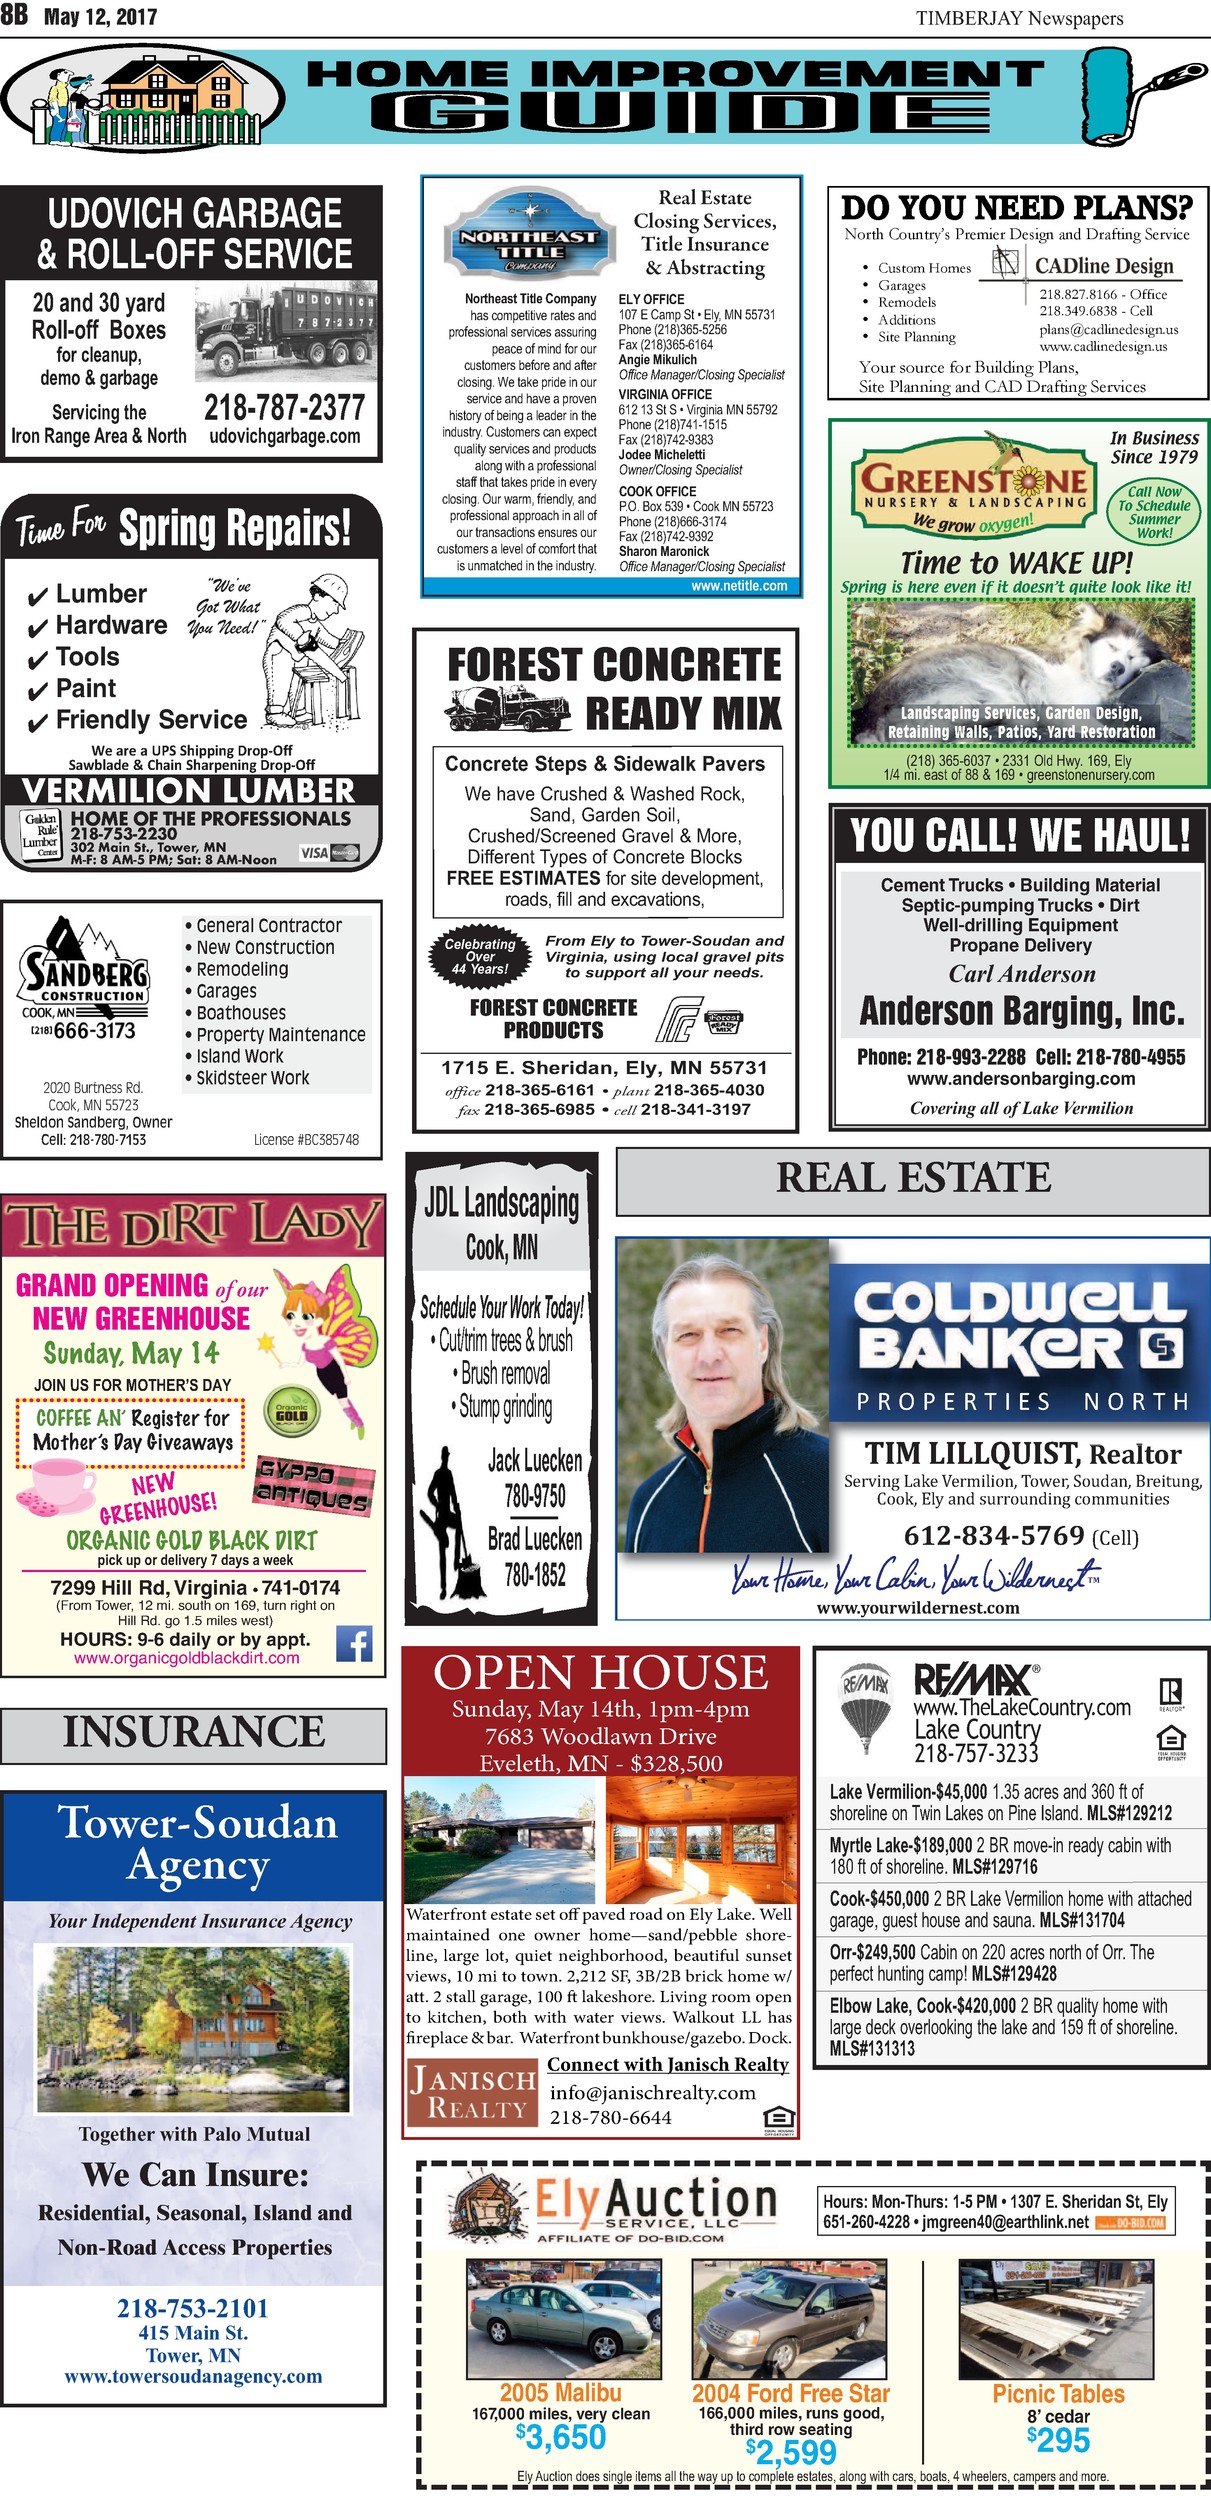 Click here for the legal notices and classifieds from page 8B